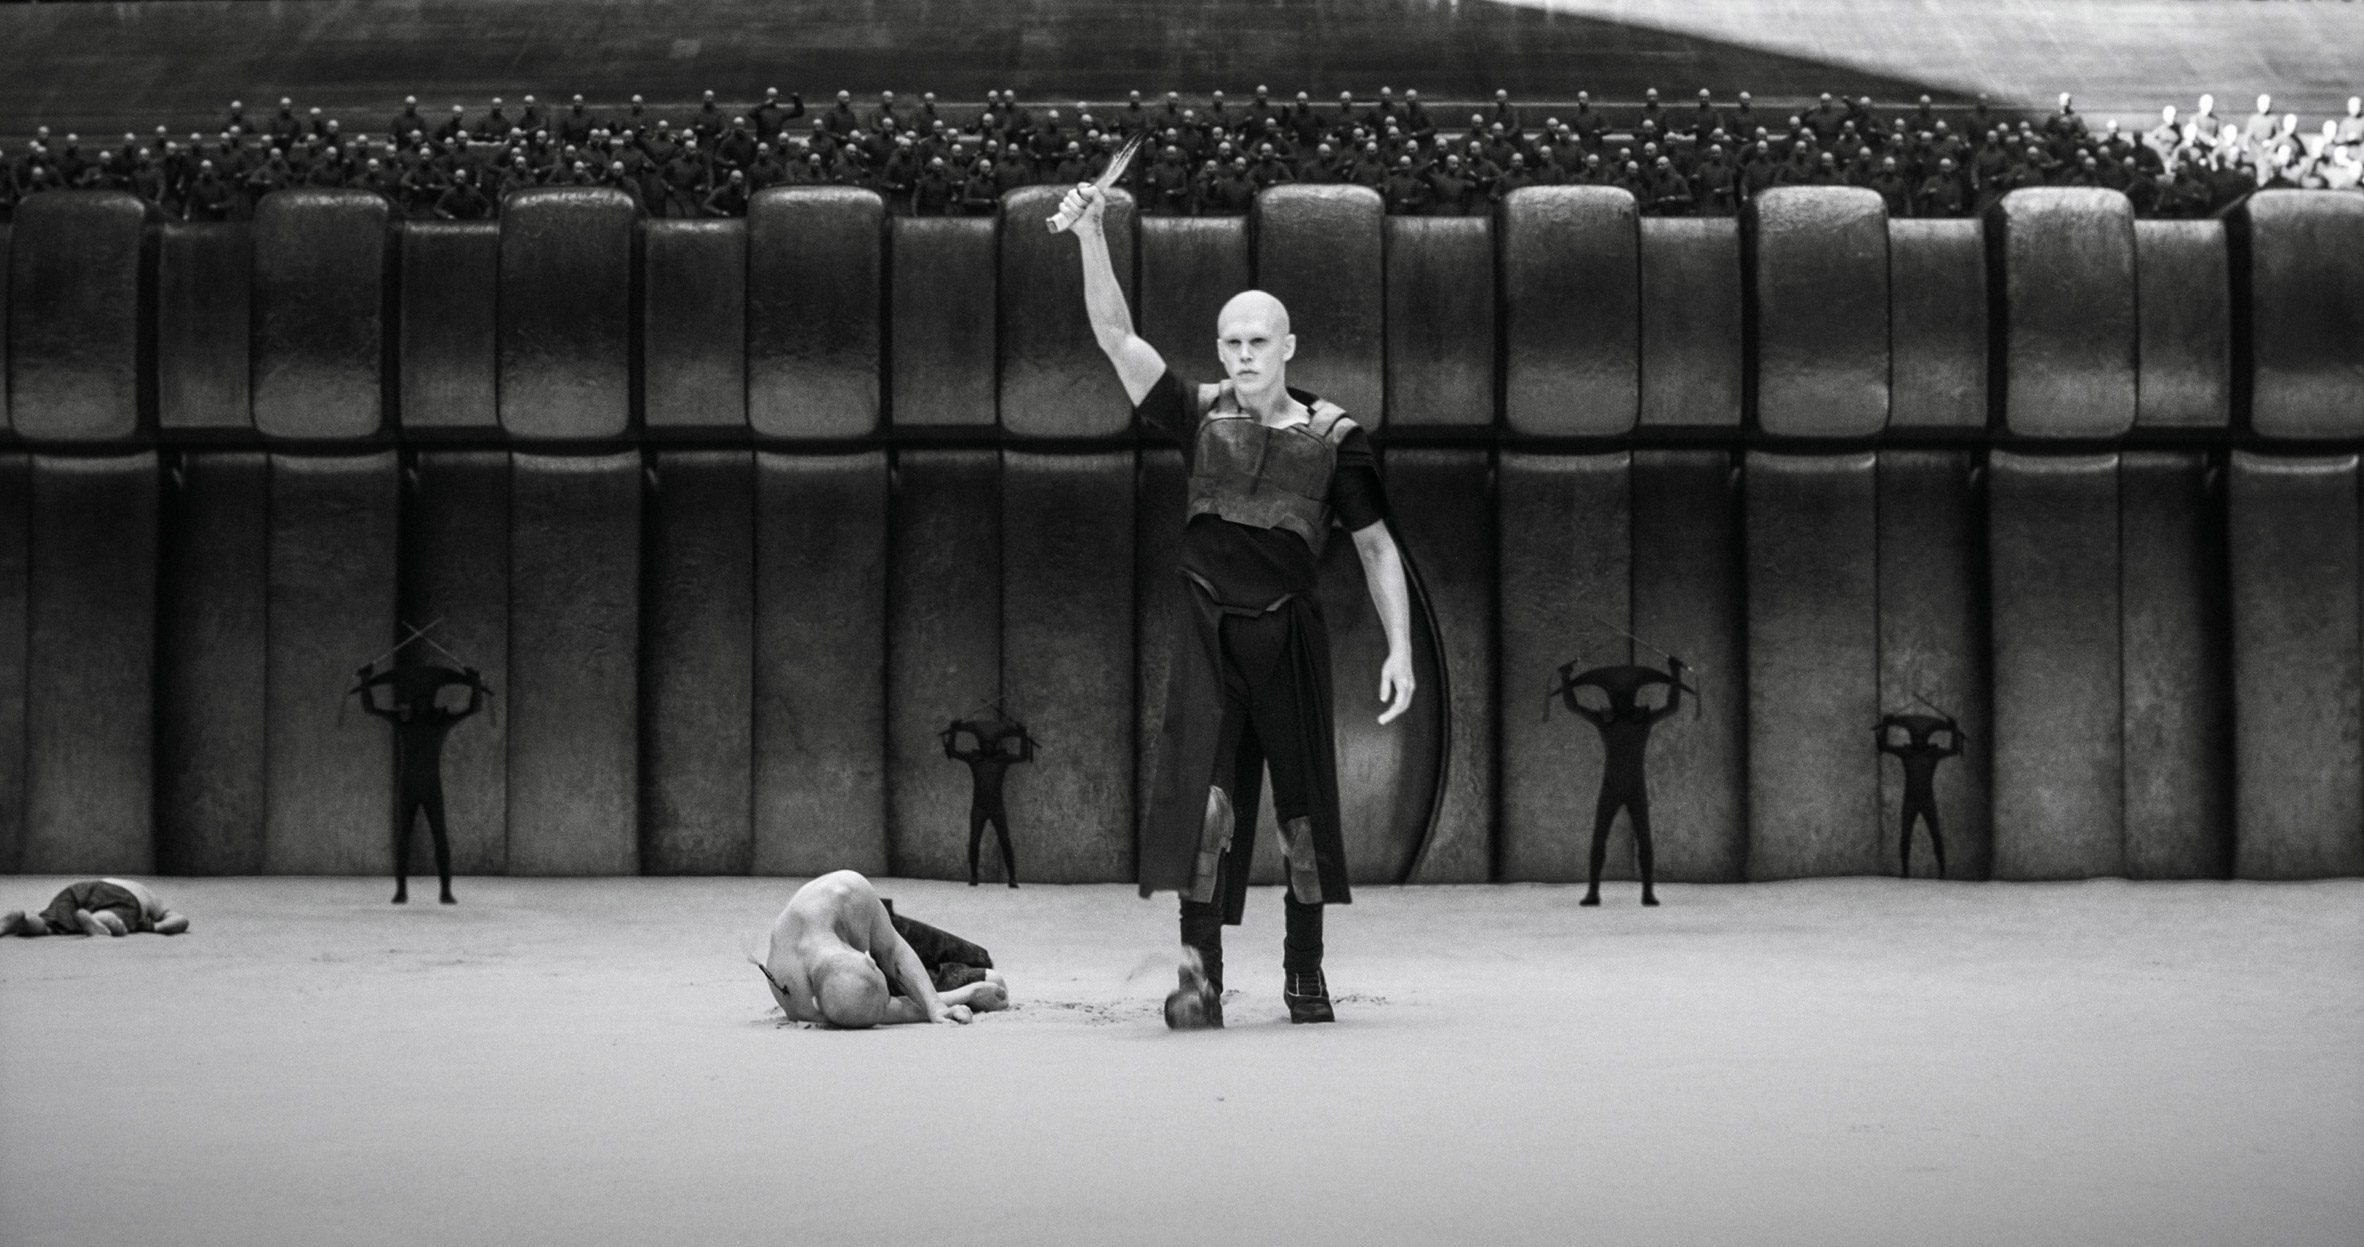 Dune Part Two production photo showing Feyd-Rautha Harkonnen holding his knife up in victory in a battle arena. The image is in black and white